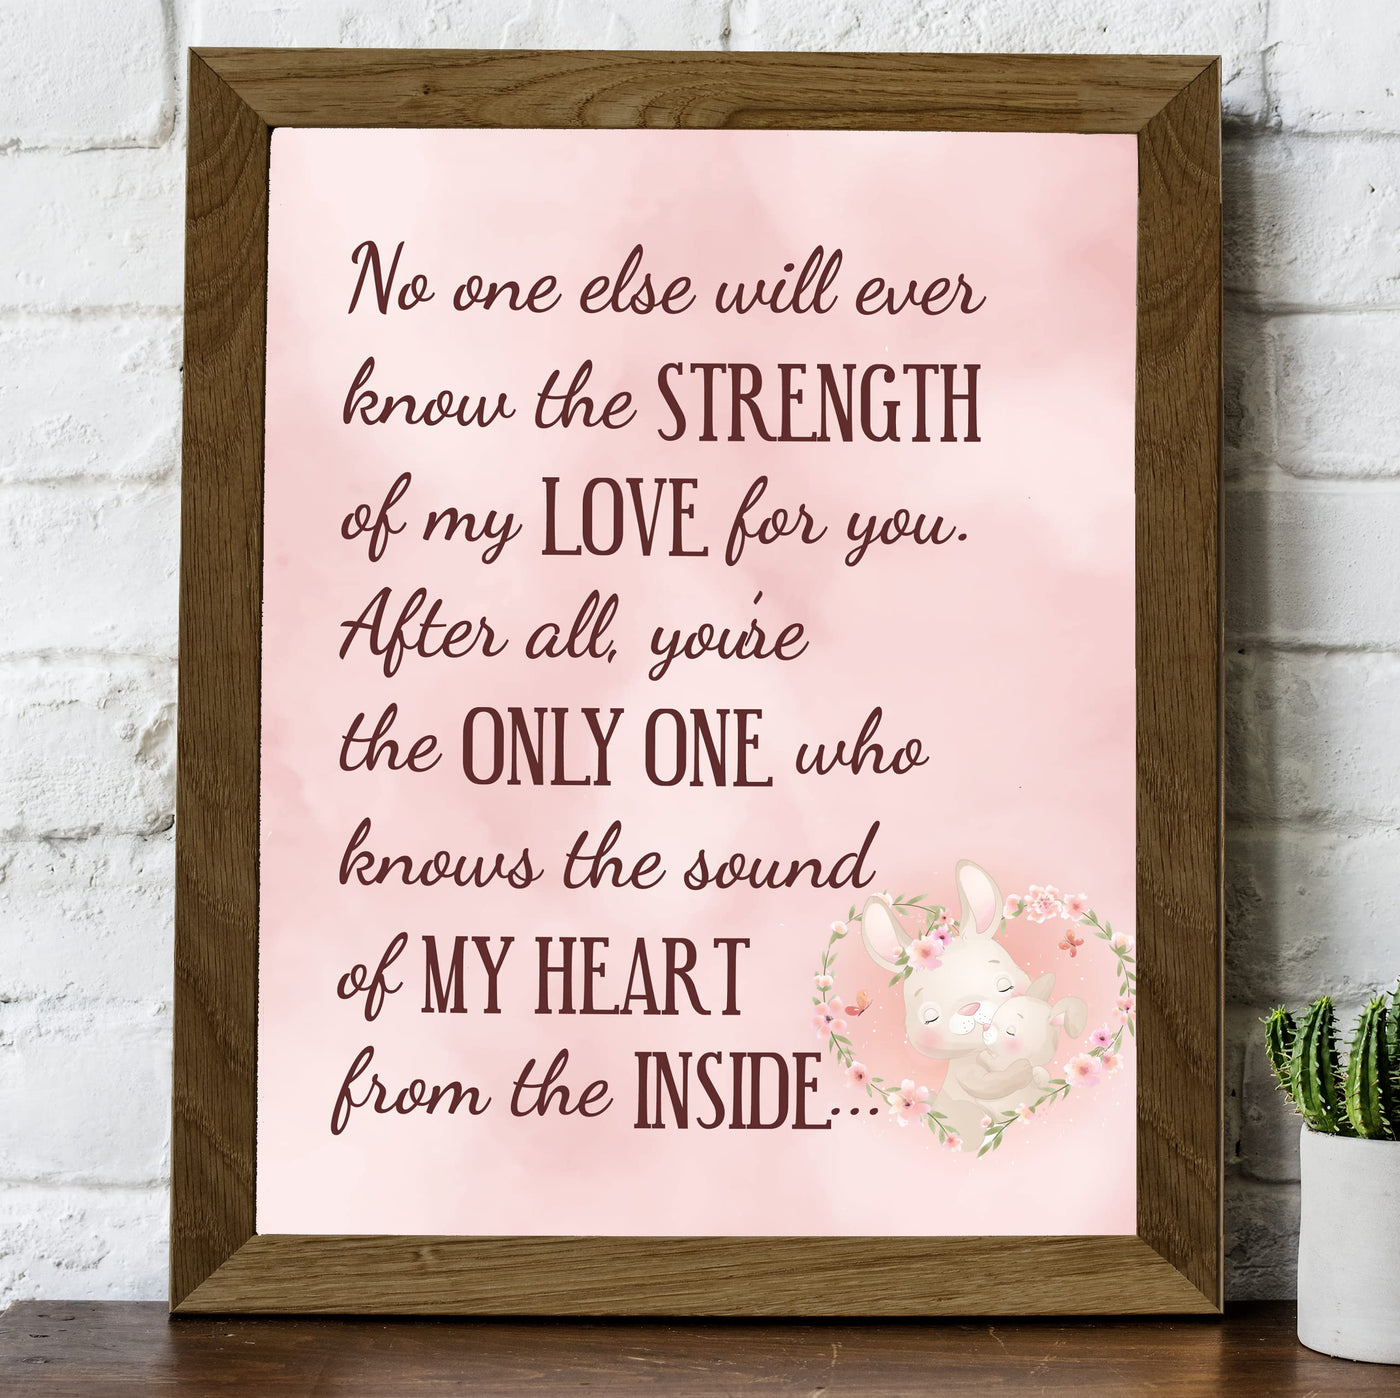 "The Strength of My Love" Inspirational Family Wall Art -11 x 14" Mother & Child Bunny Poster Print -Ready to Frame. Home-Children's Bedroom-Nursery Decor. Great for Baby Shower Gifts!